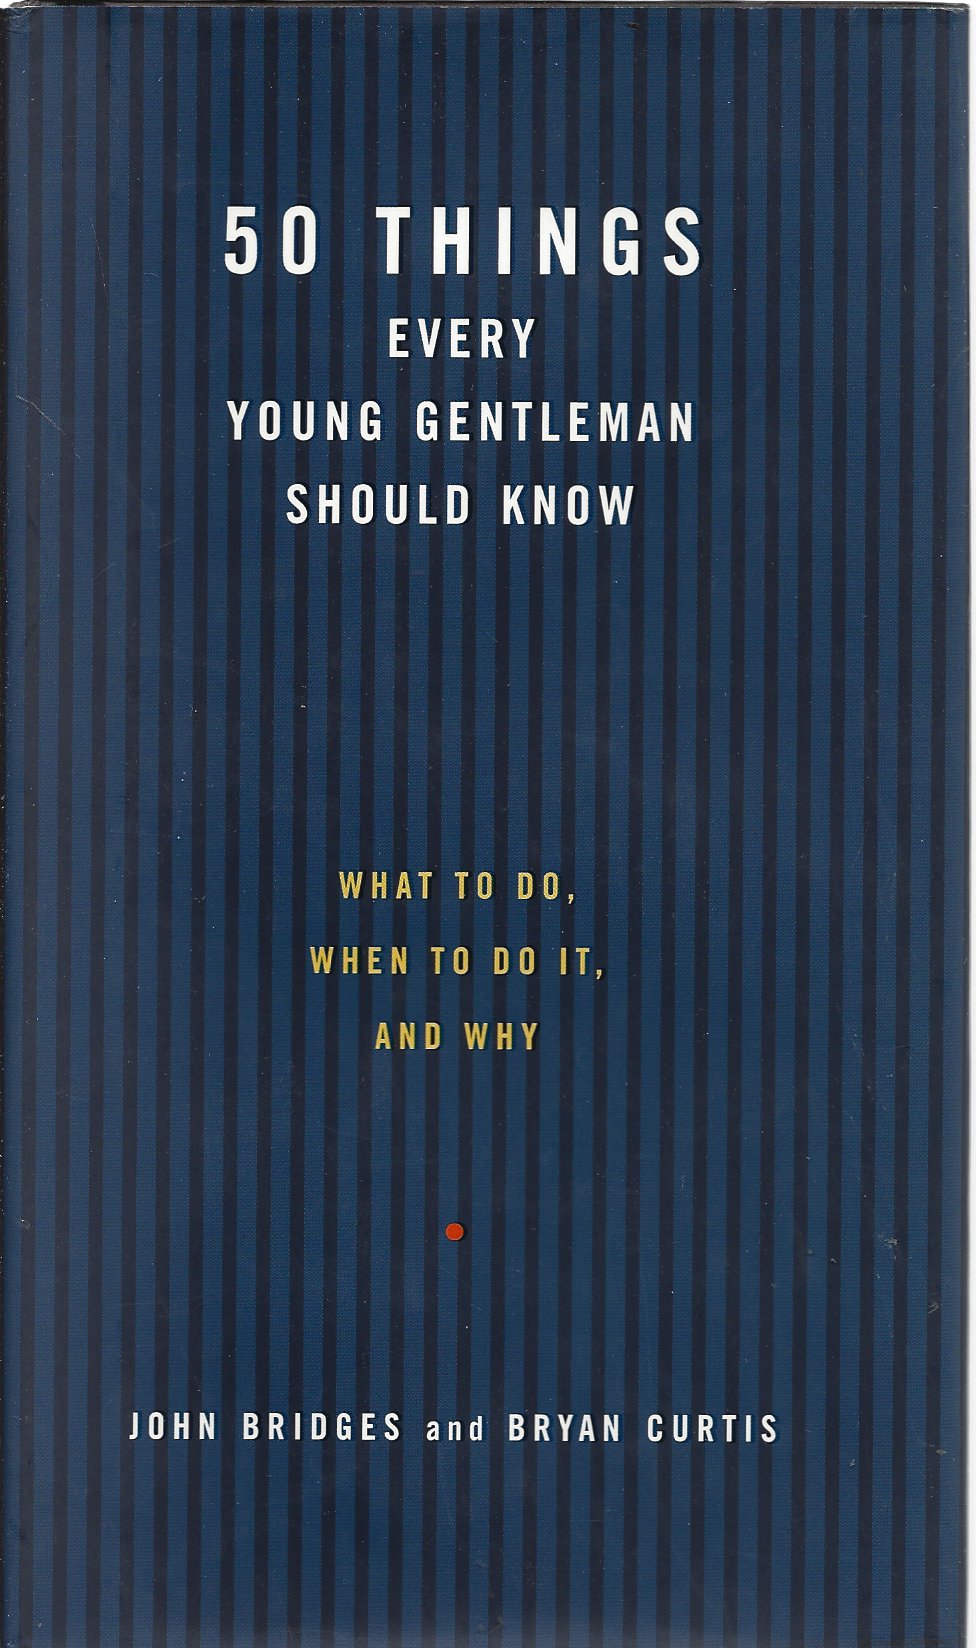 Bridges, John and Curtis, Bryan - 50 Things every young gentleman should know -What to do, when to do it and why